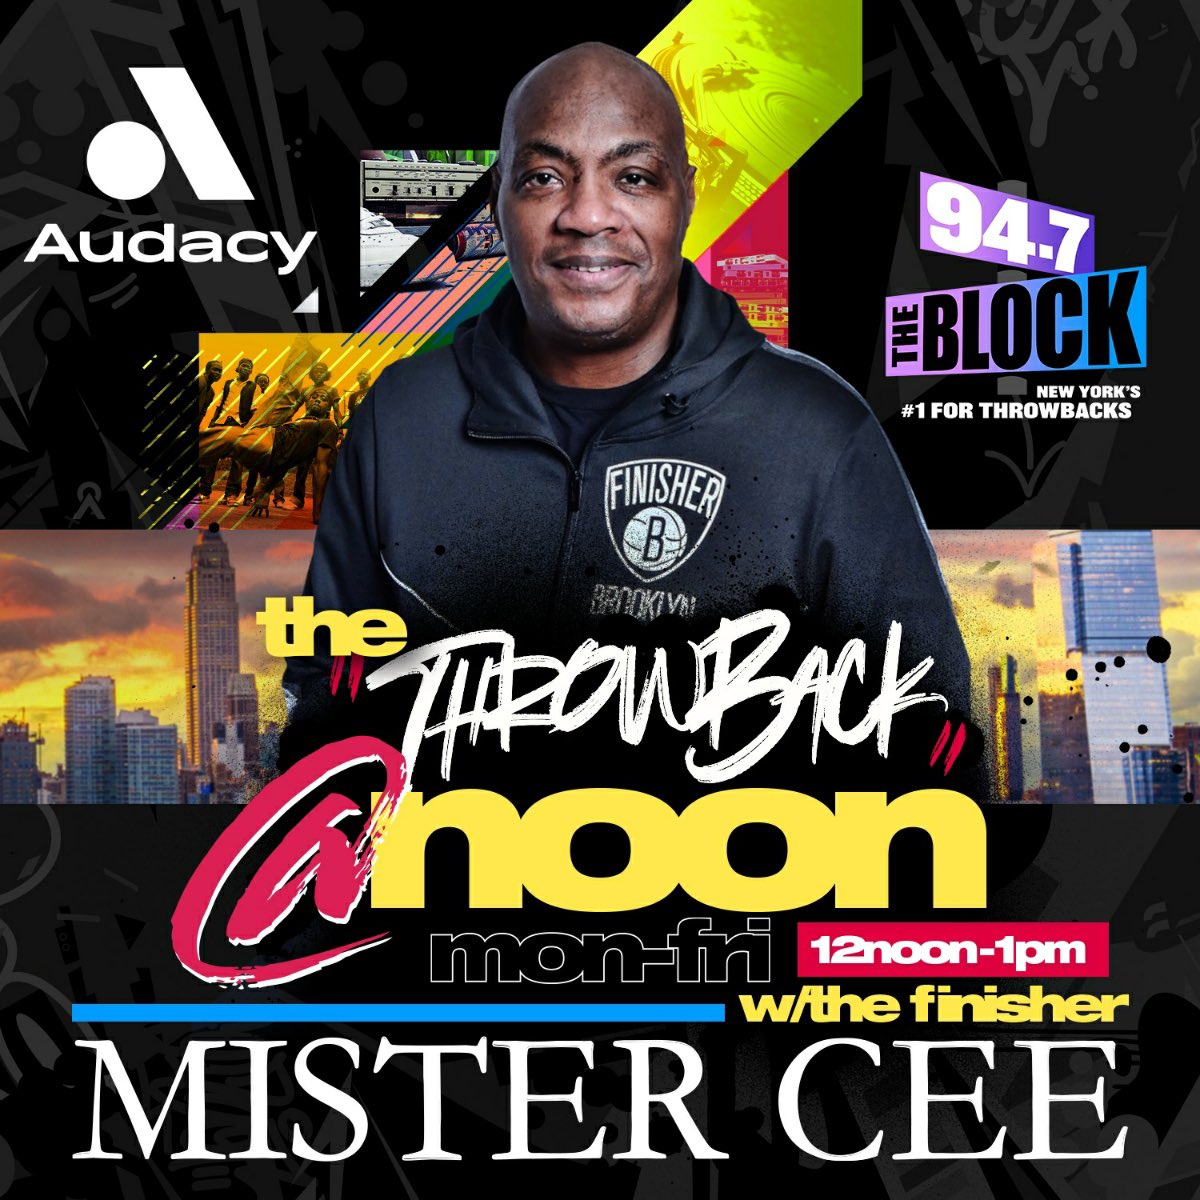 2DAY!!! FROM 12NOON-1PM!!! THE THROWBACK @ NOON WIT THE FINISHER @djmistercee IN THE MIX ON 94.7 THE BLOCK @947theblock & THE FREE AUDACY APP @audacy NY’S #1 FOR THROWBACKS!!! #ThrowbackAtNoon #TheFinisher #WallopKing